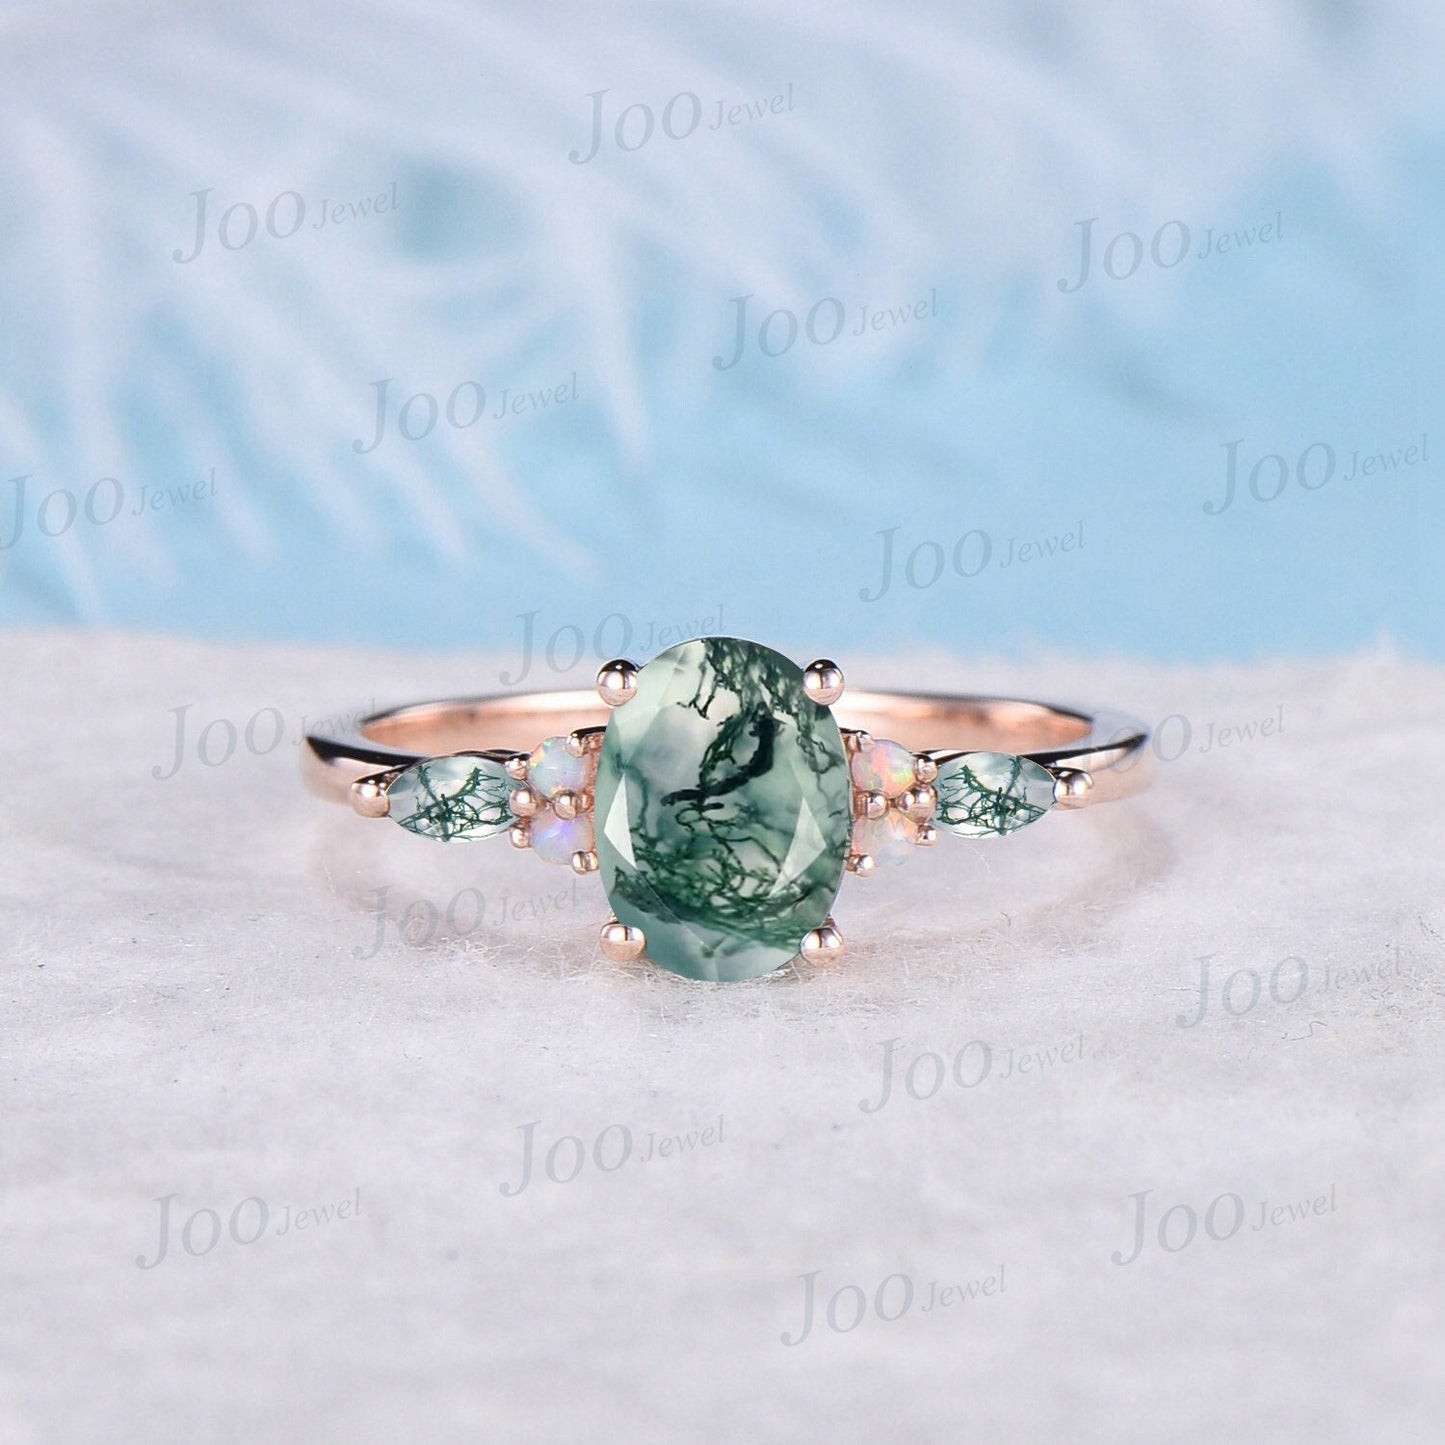 Opal Moss Agate Engagement Rings Rose Gold Silver 1.5ct Oval Cut Cluster Aquatic Agate Promise Ring Unique Marquise Moss Agate Wedding Ring